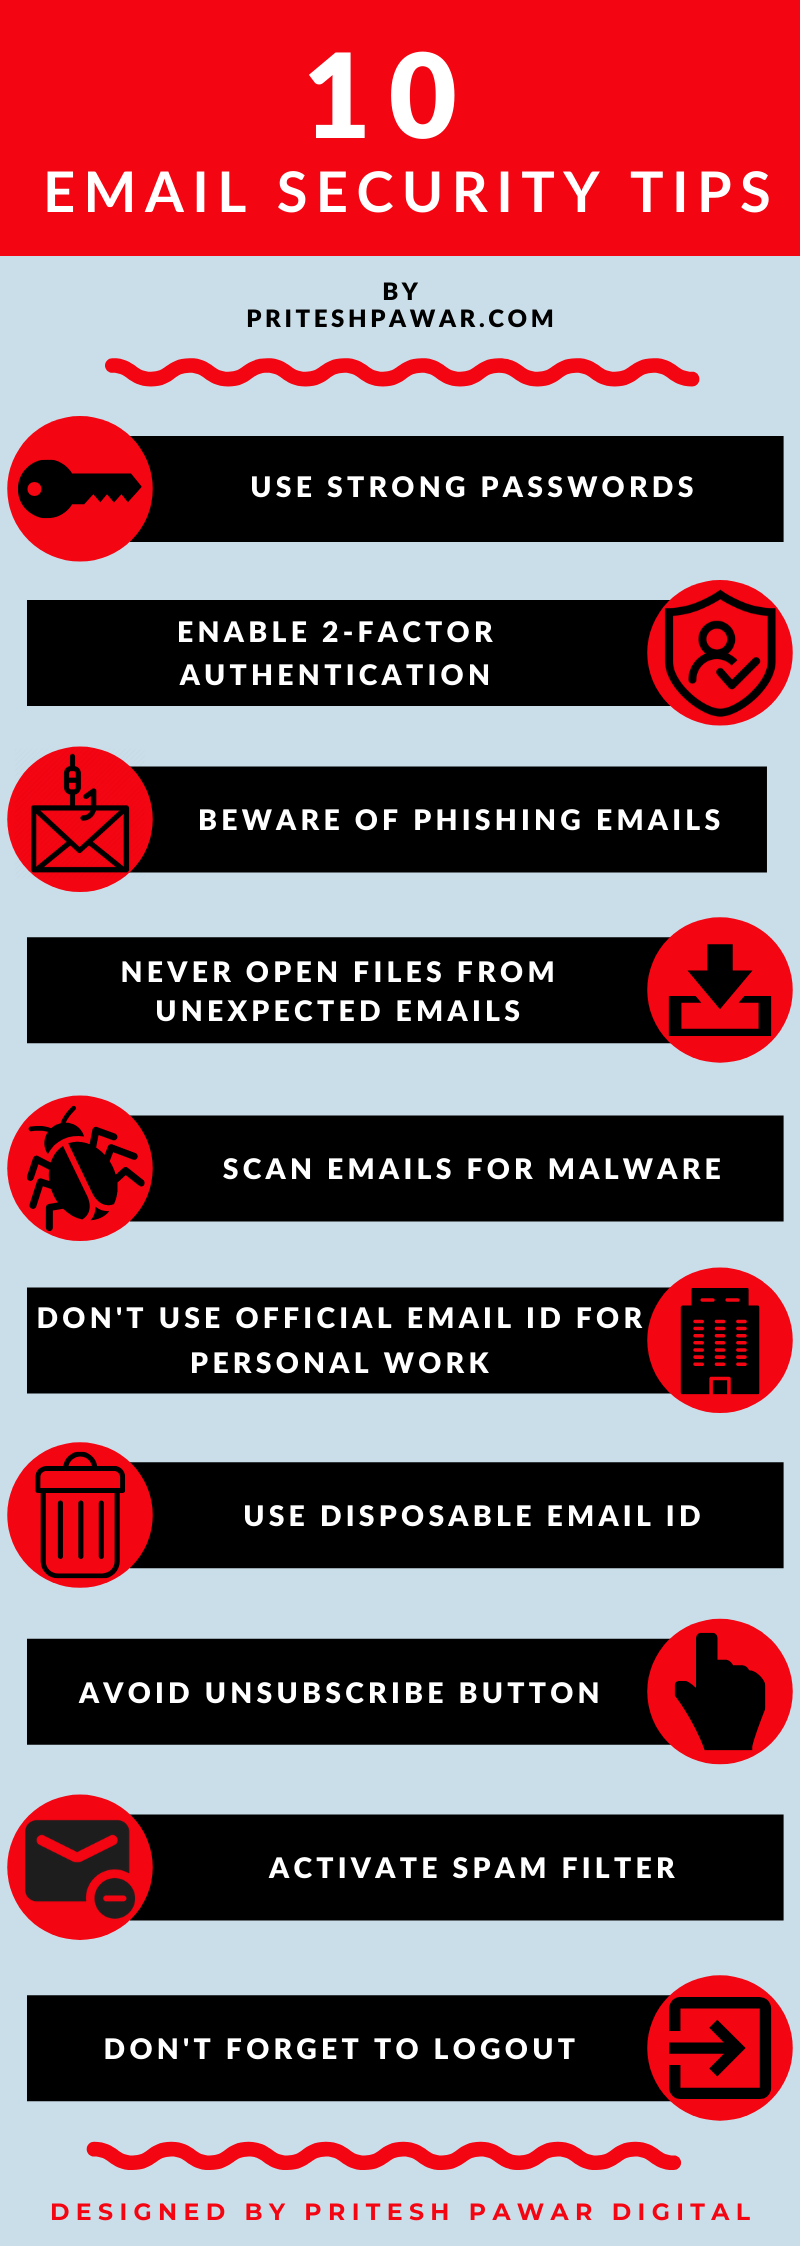 Email Security Tips Infographic